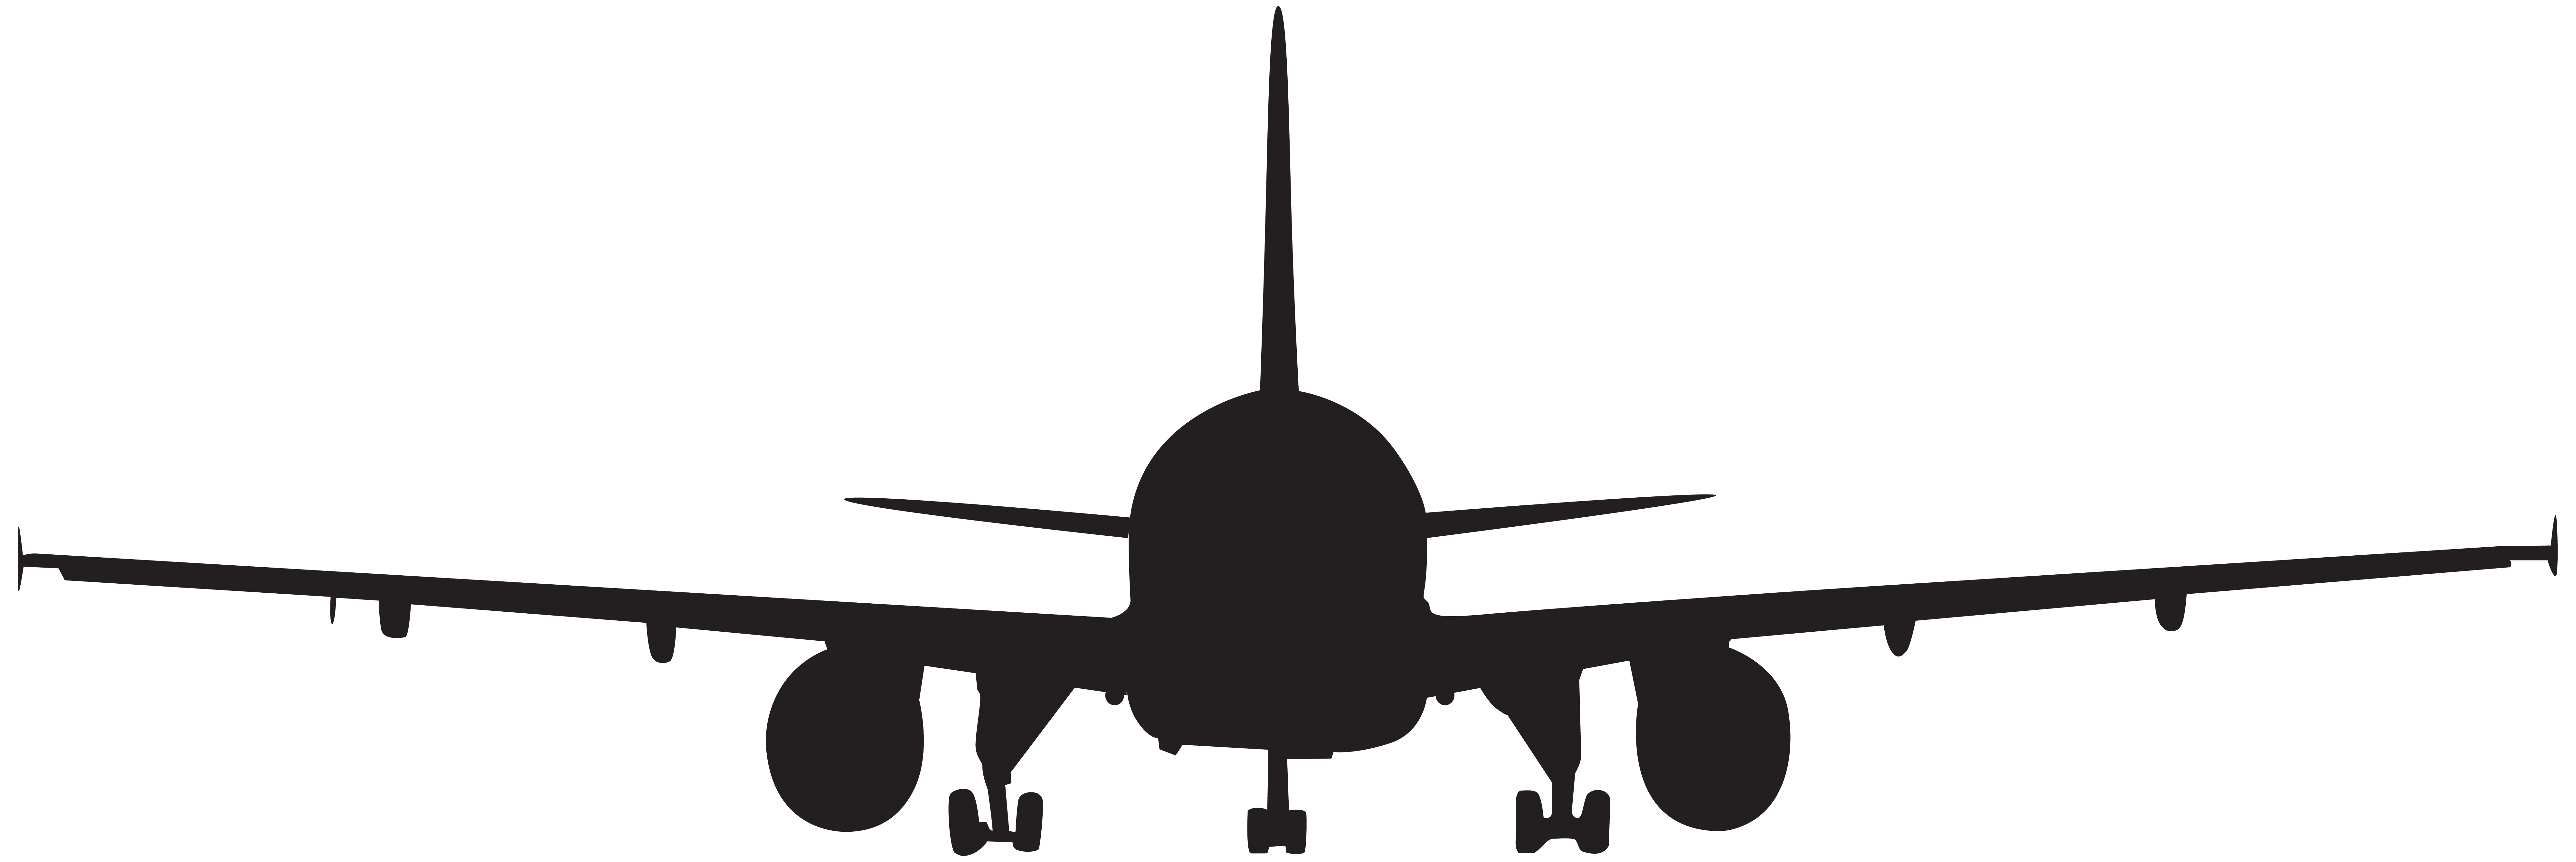 Aircraft Silhouette At Getdrawings Free Download